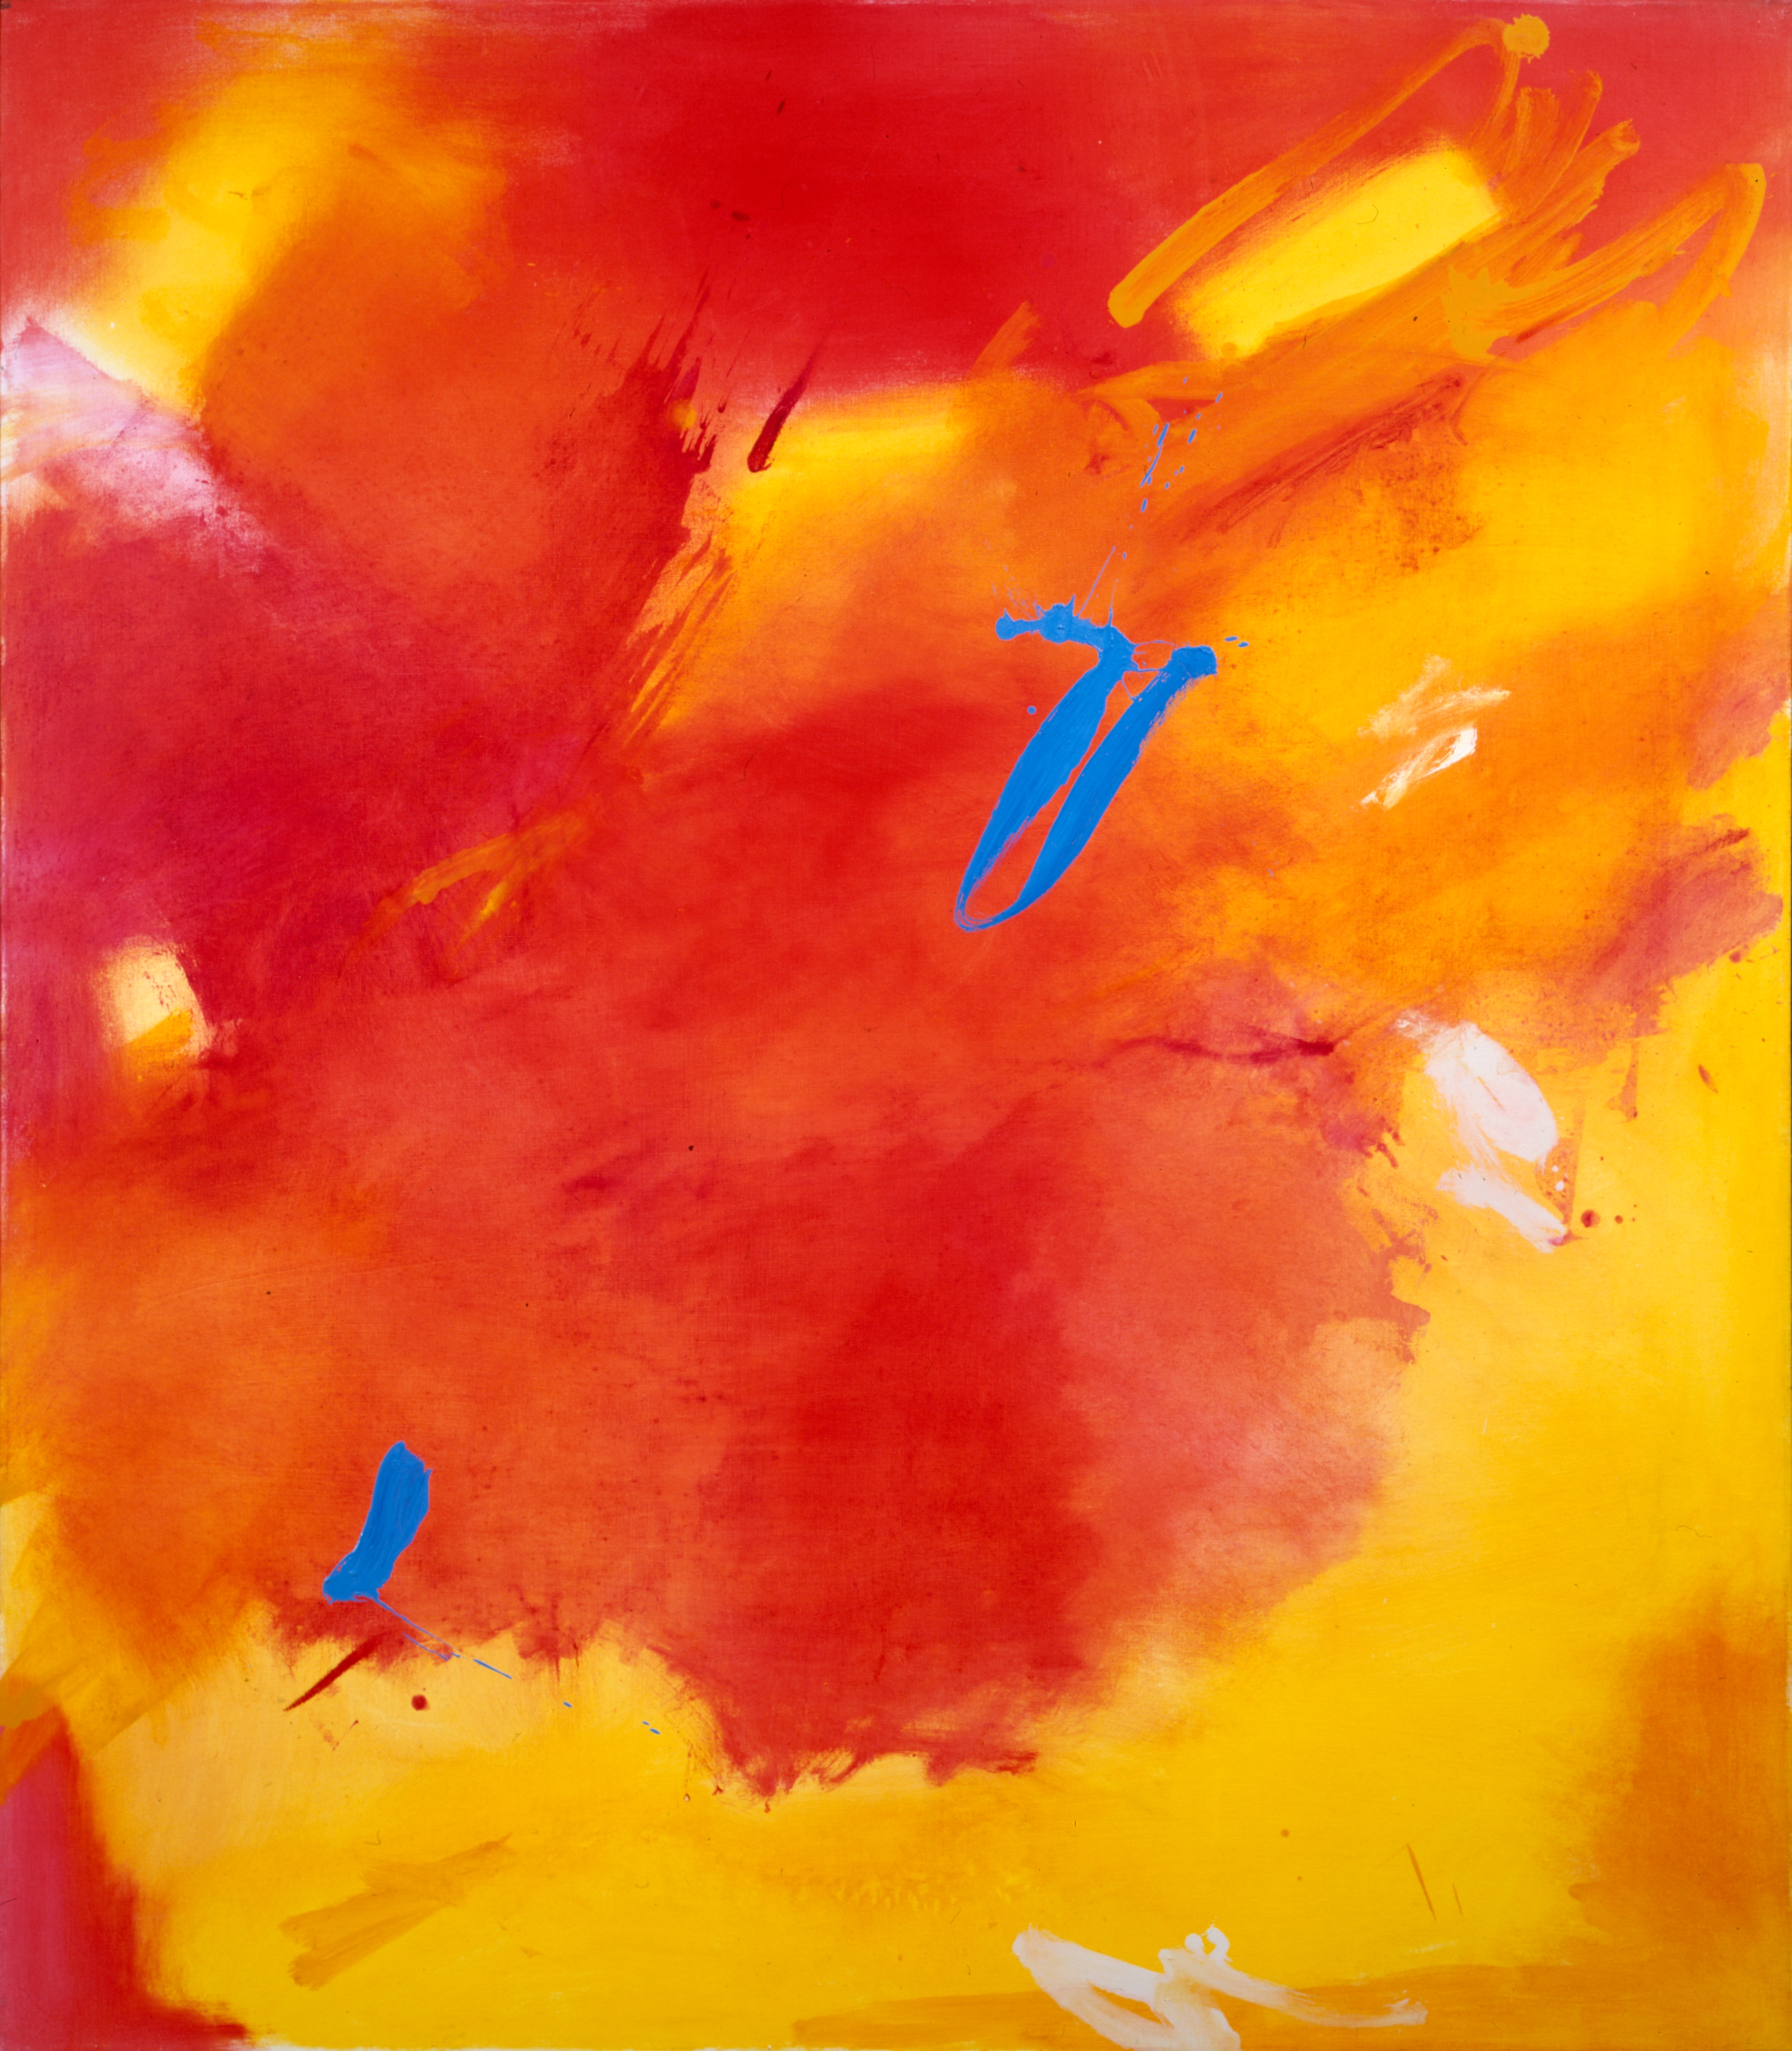 Red, orange, and yellow oil on canvas painting with a small gestures of bright blue as a dash and V-shape toward the center of the composition.